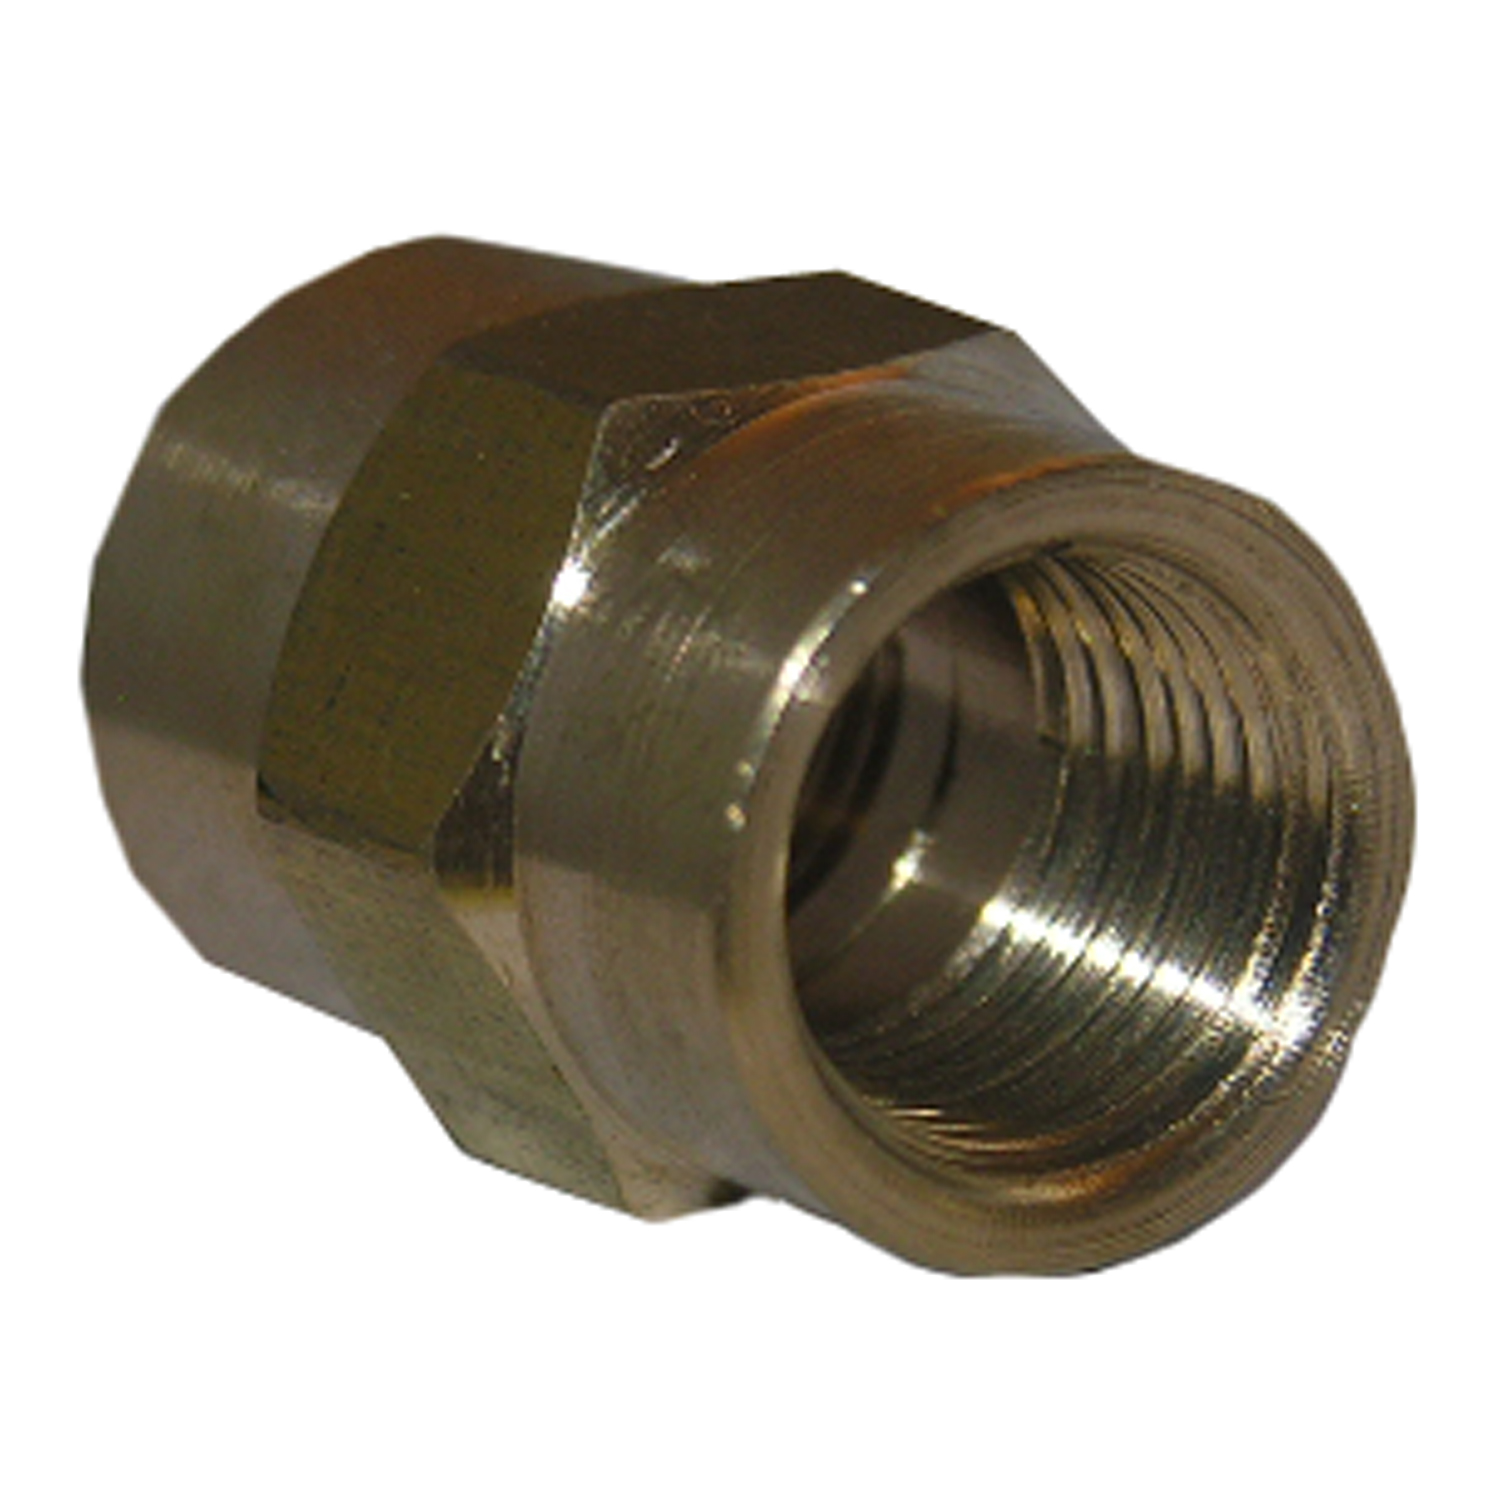 Lasco 17-9223 Pipe Coupling, 1/4 in, FPT, Brass